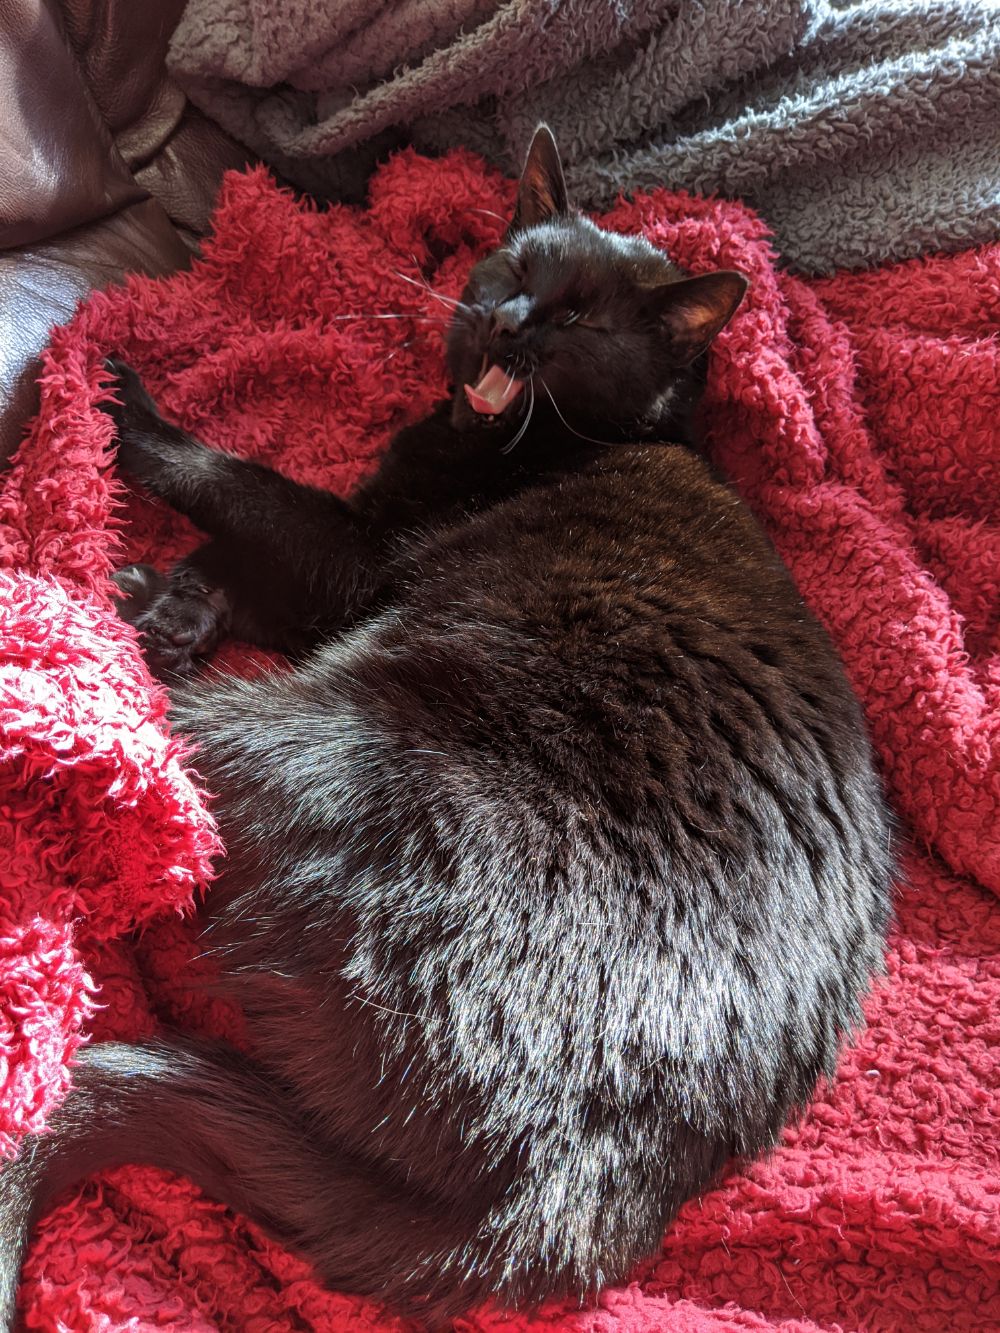 Black cat on a red blanket in the sun, yawning